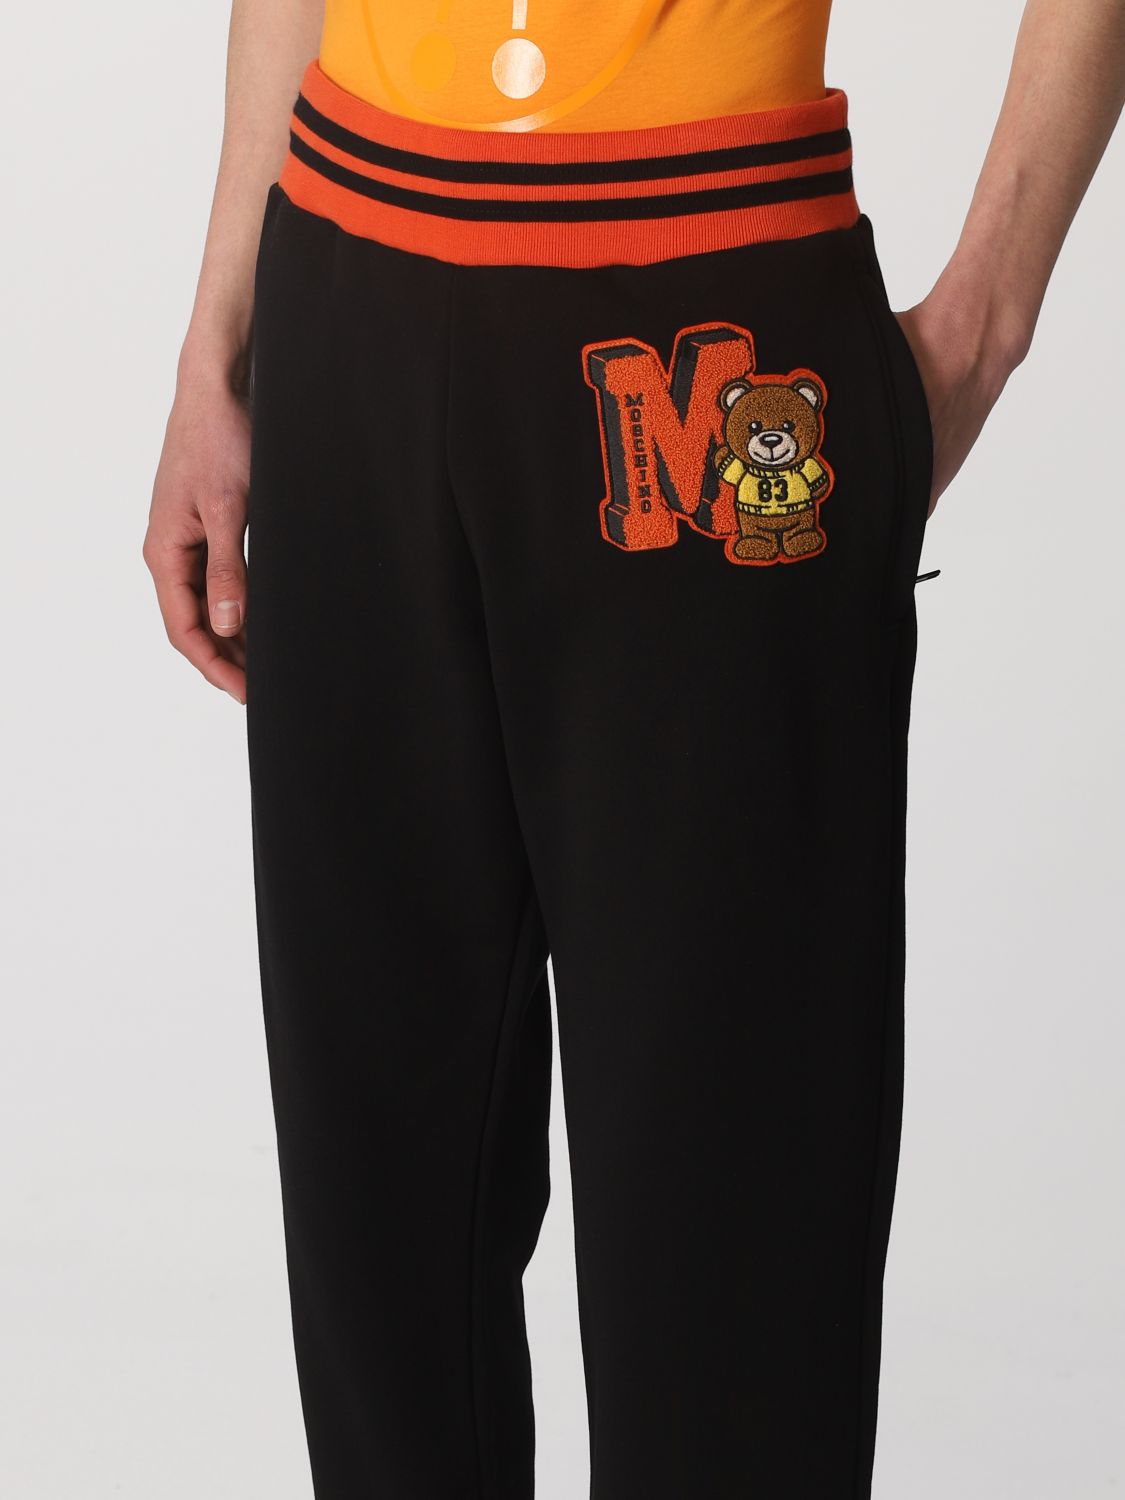 MOSCHINO jogging pants - Black | Moschino Couture pants 0350228 online GIGLIO.COM